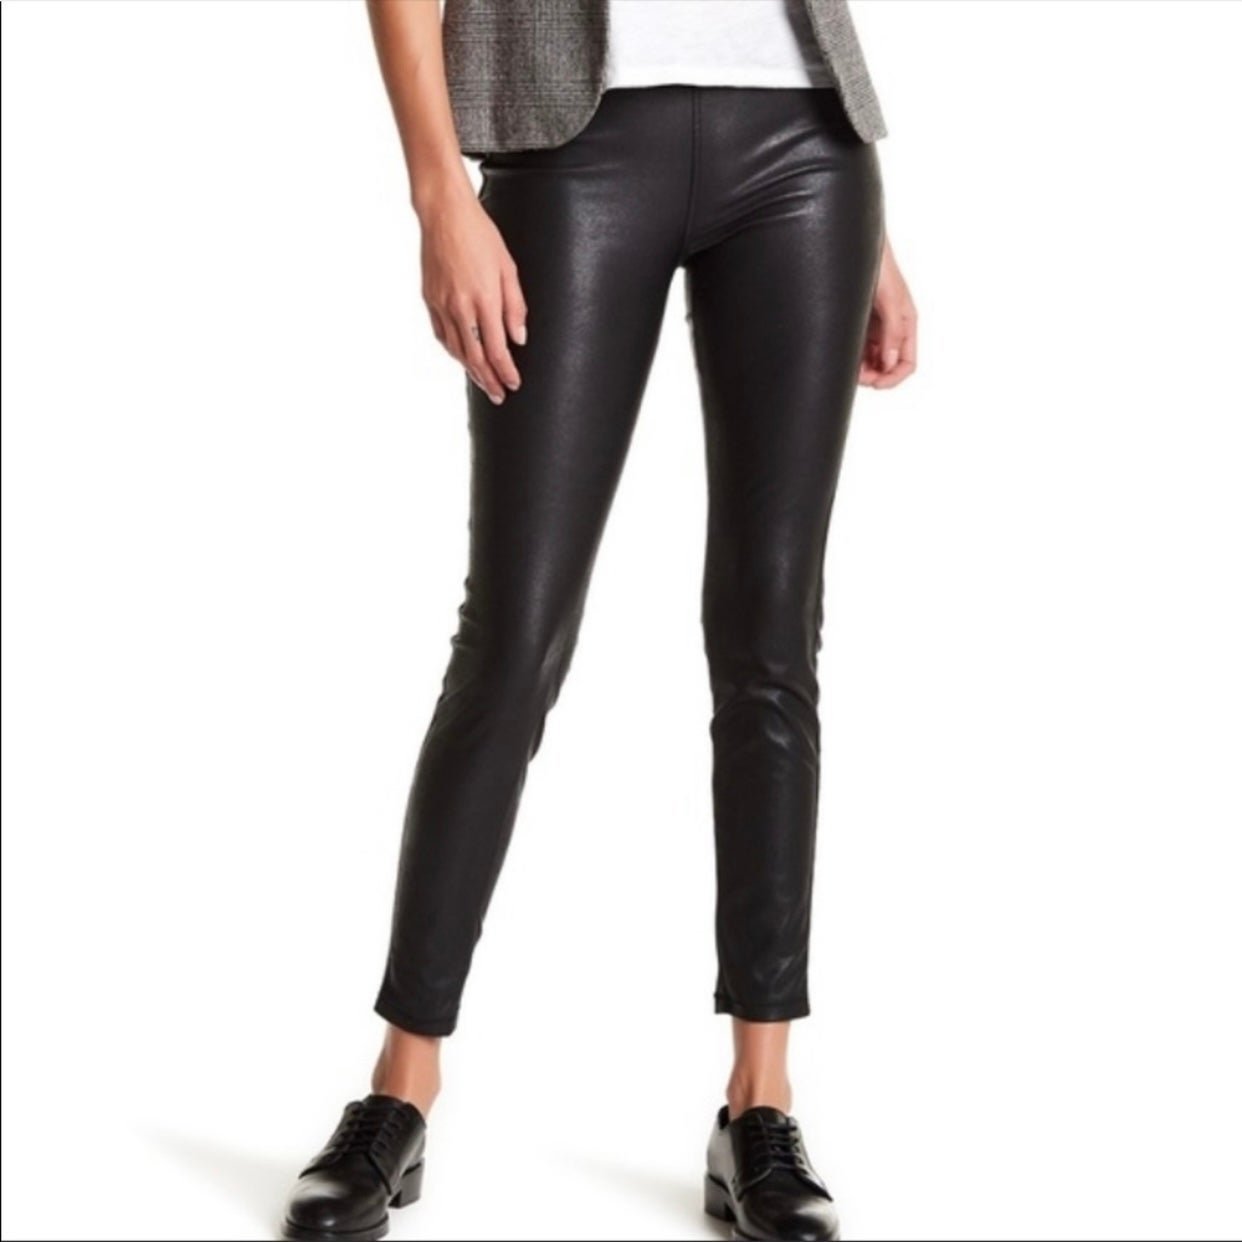 Gorgeous Blank NYC Black Faux Leather Leggings Size 28 FKvk7XpP5 Everyday Low Prices